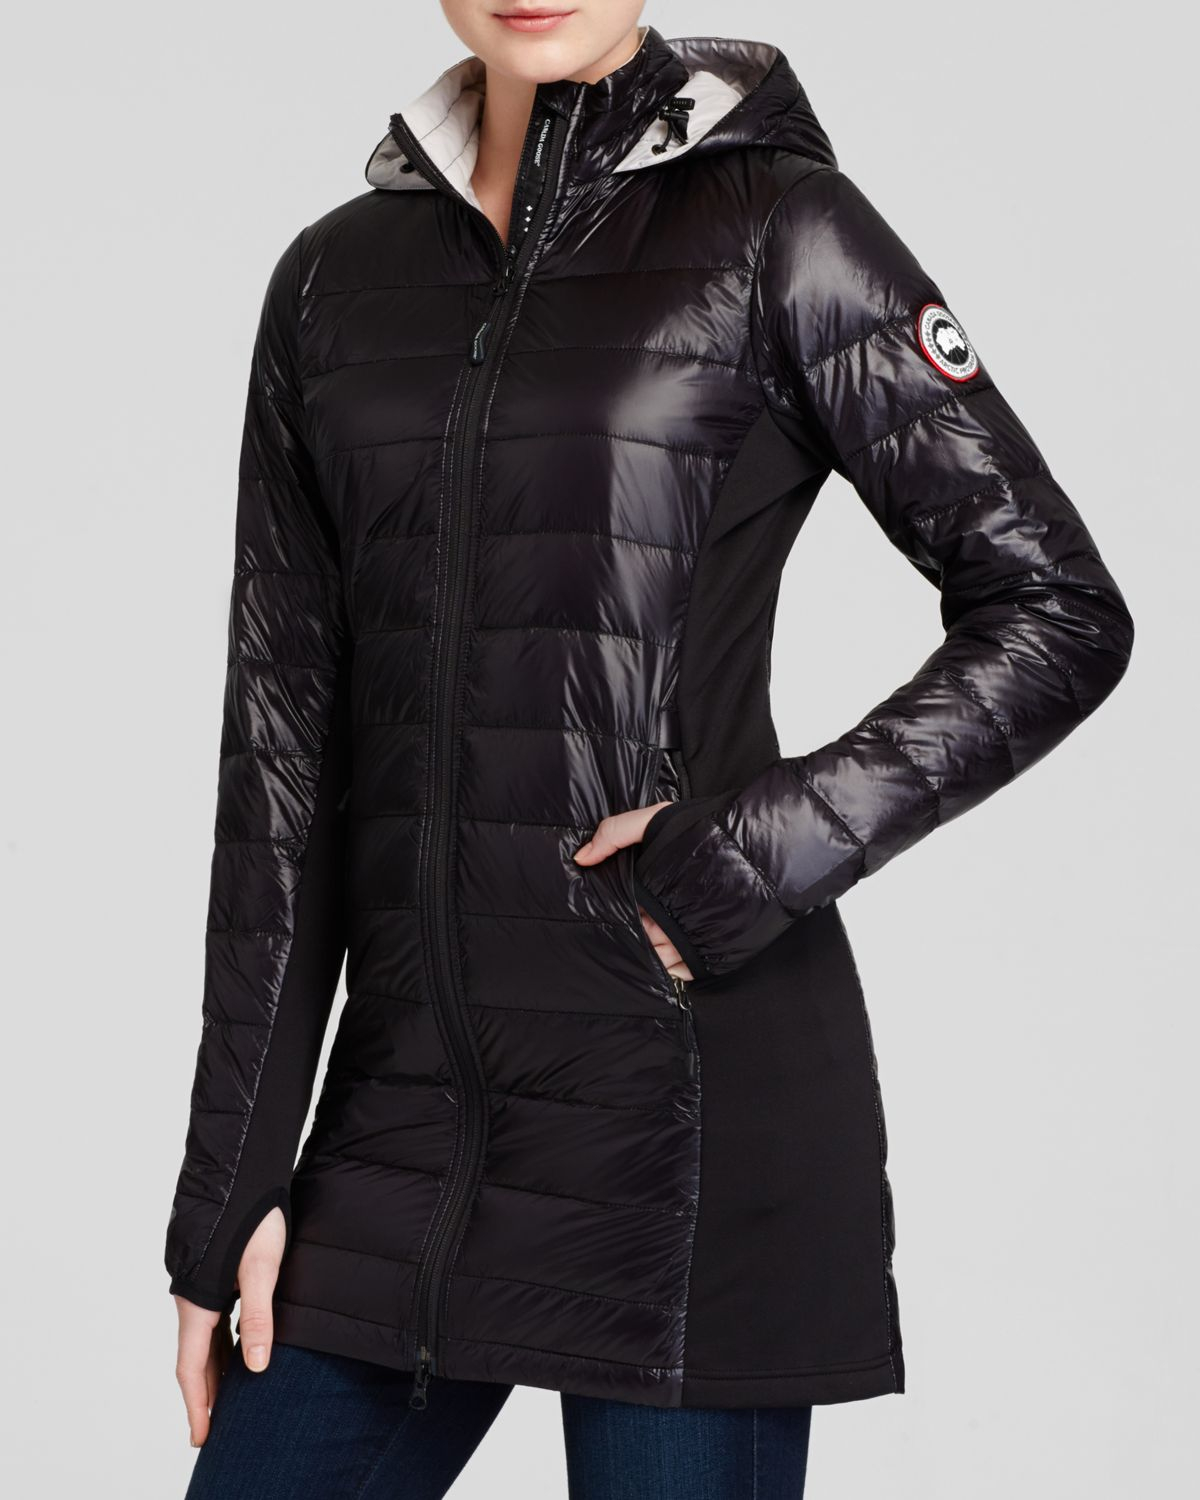 Canada Goose expedition parka replica discounts - Buy Latest Holt Renfrew Canada Goose Chilliwack Luxuriant In Design